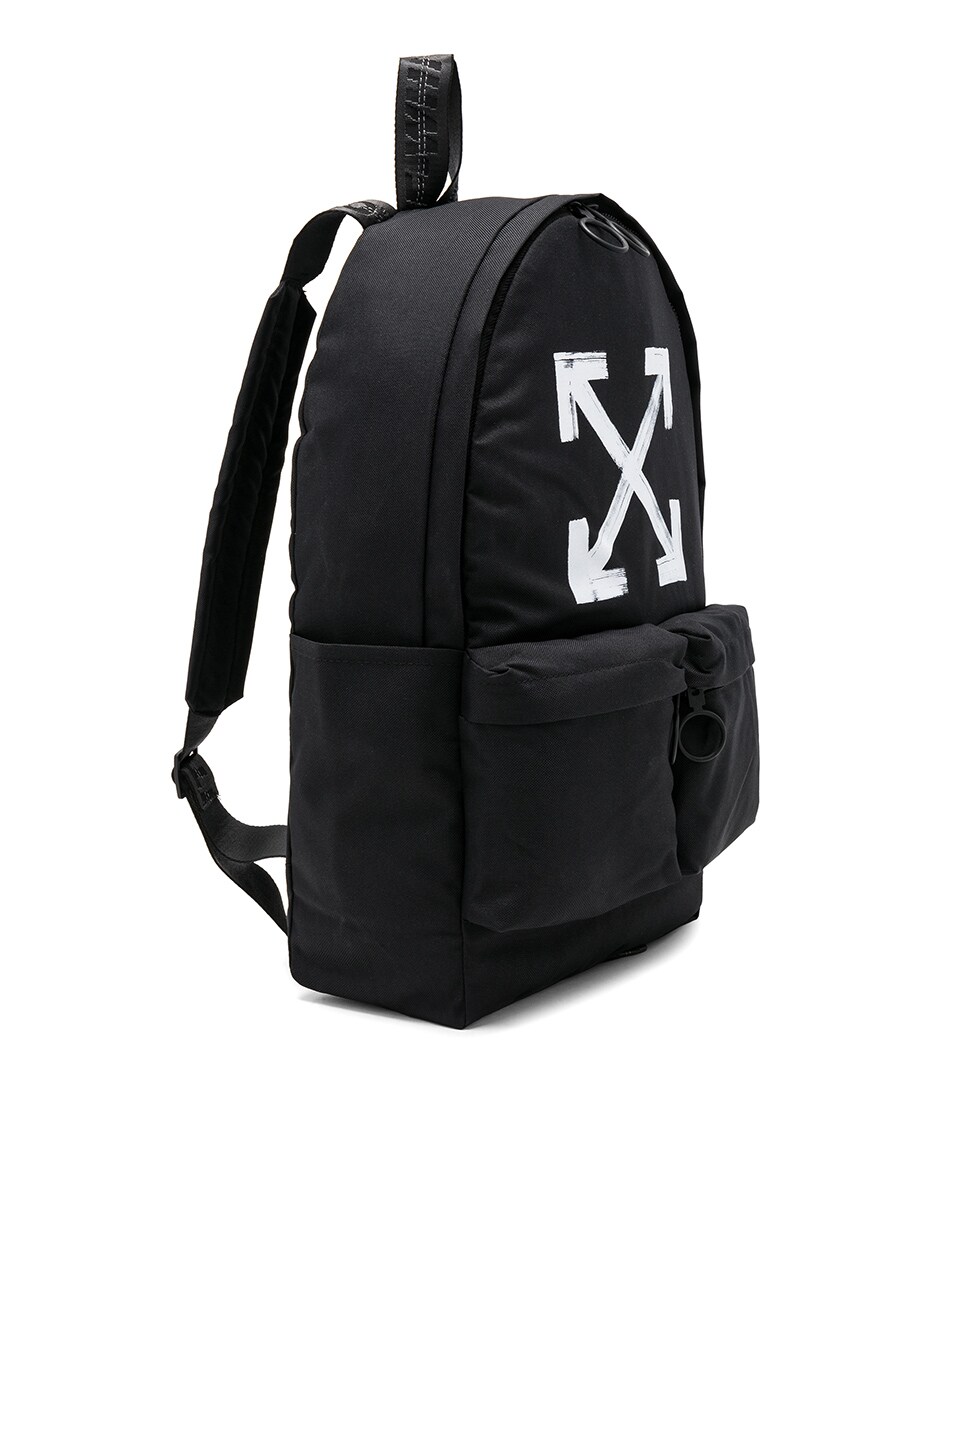 OFF-WHITE Brushed Backpack in Black & White | FWRD